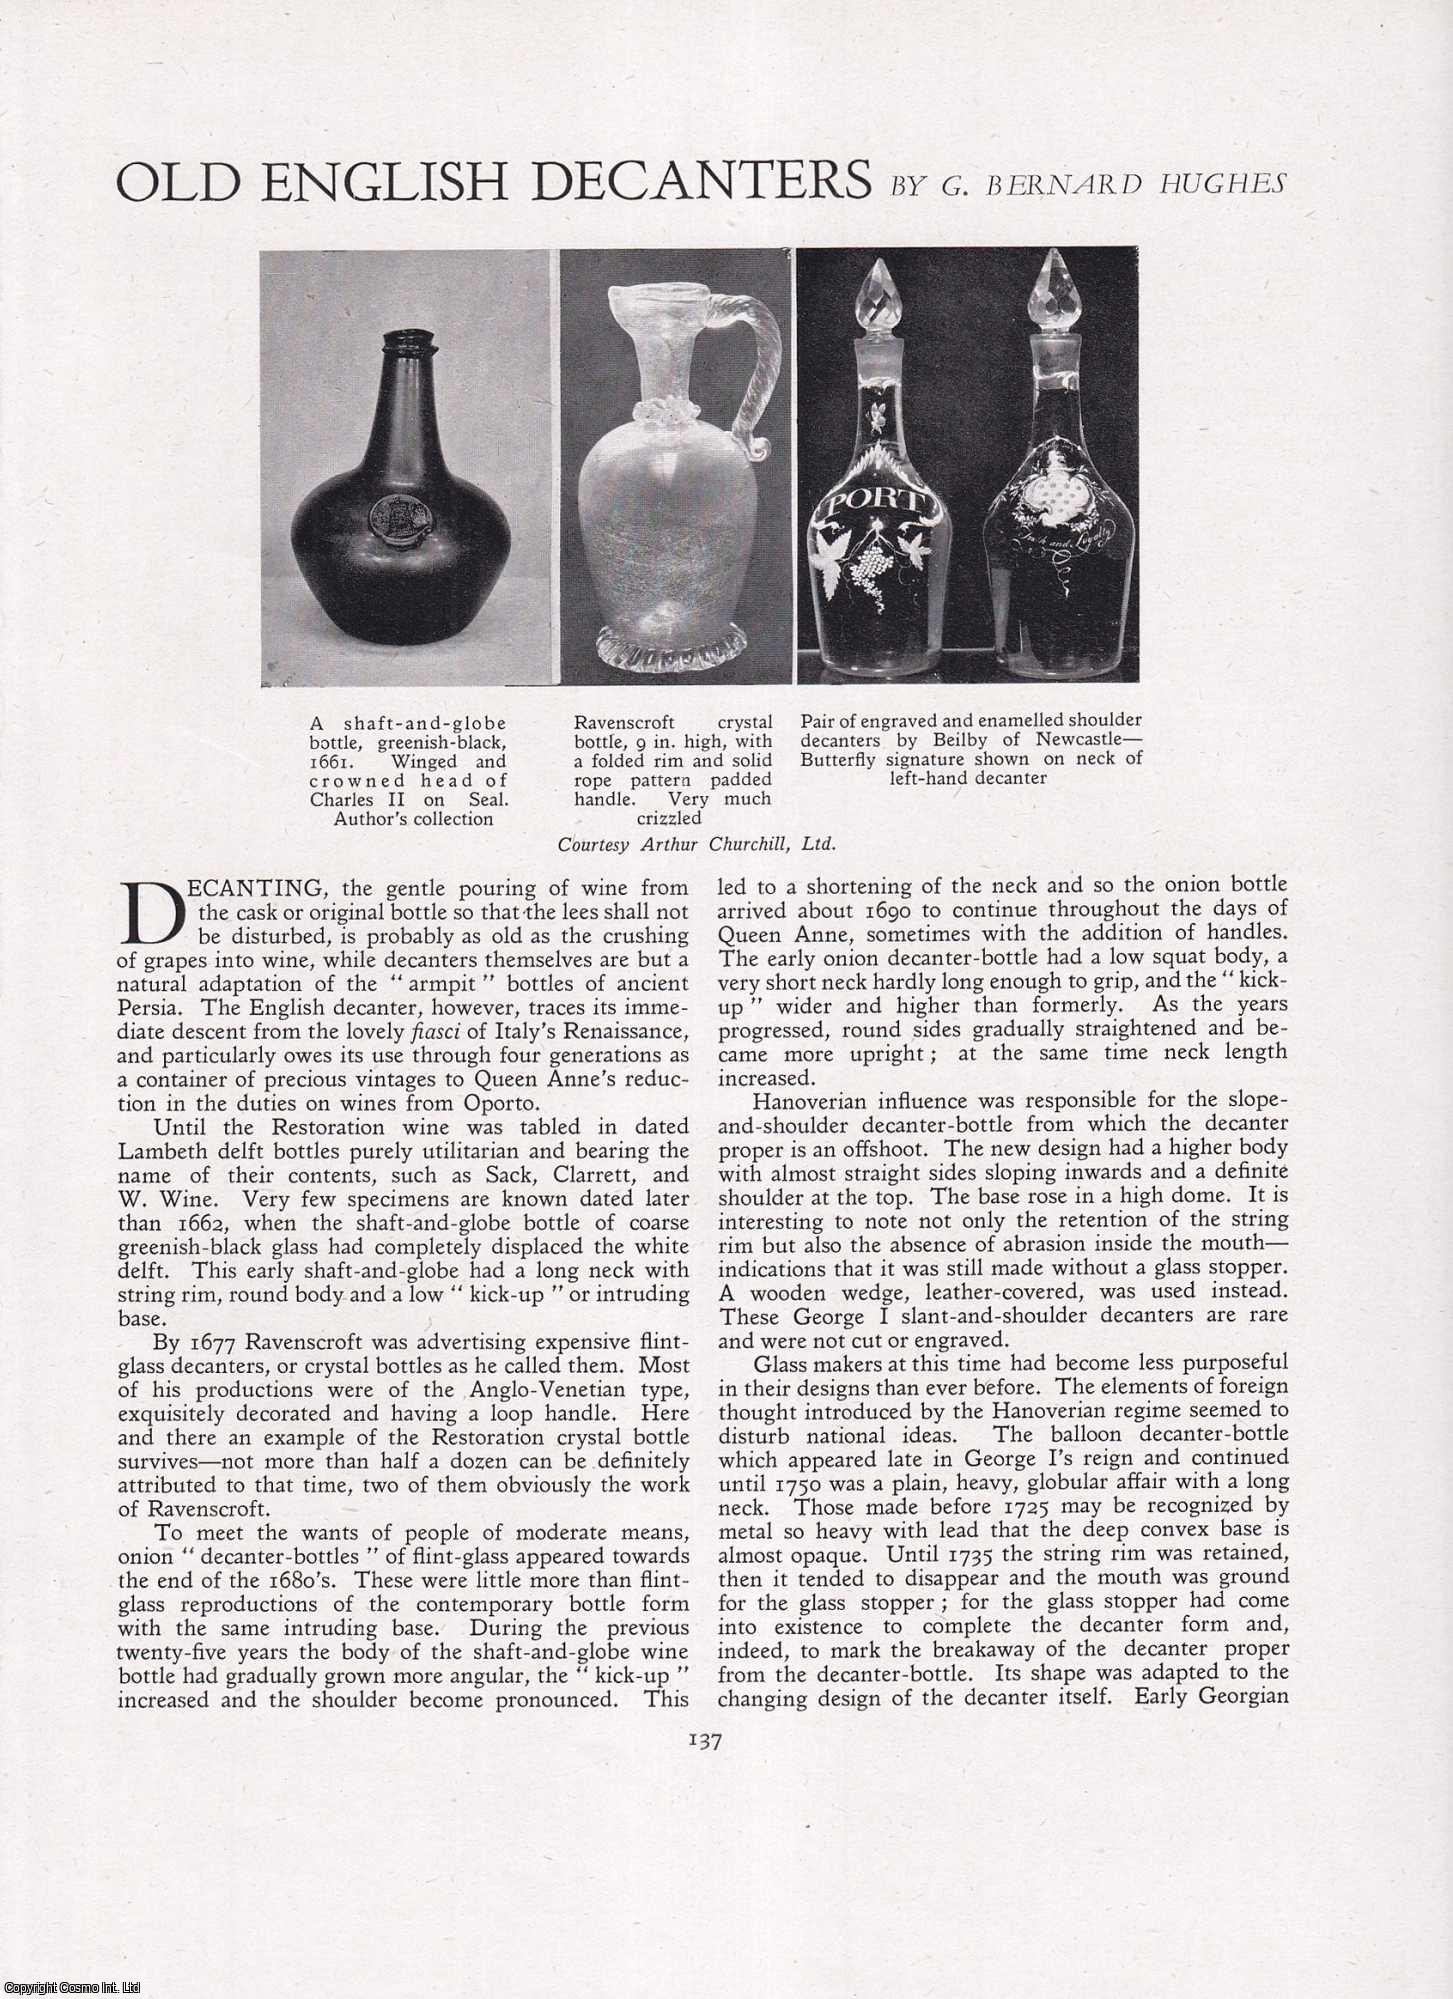 G. Bernard Hughes - Old English Decanters. An original article from Apollo, International Magazine of the Arts, 1943.